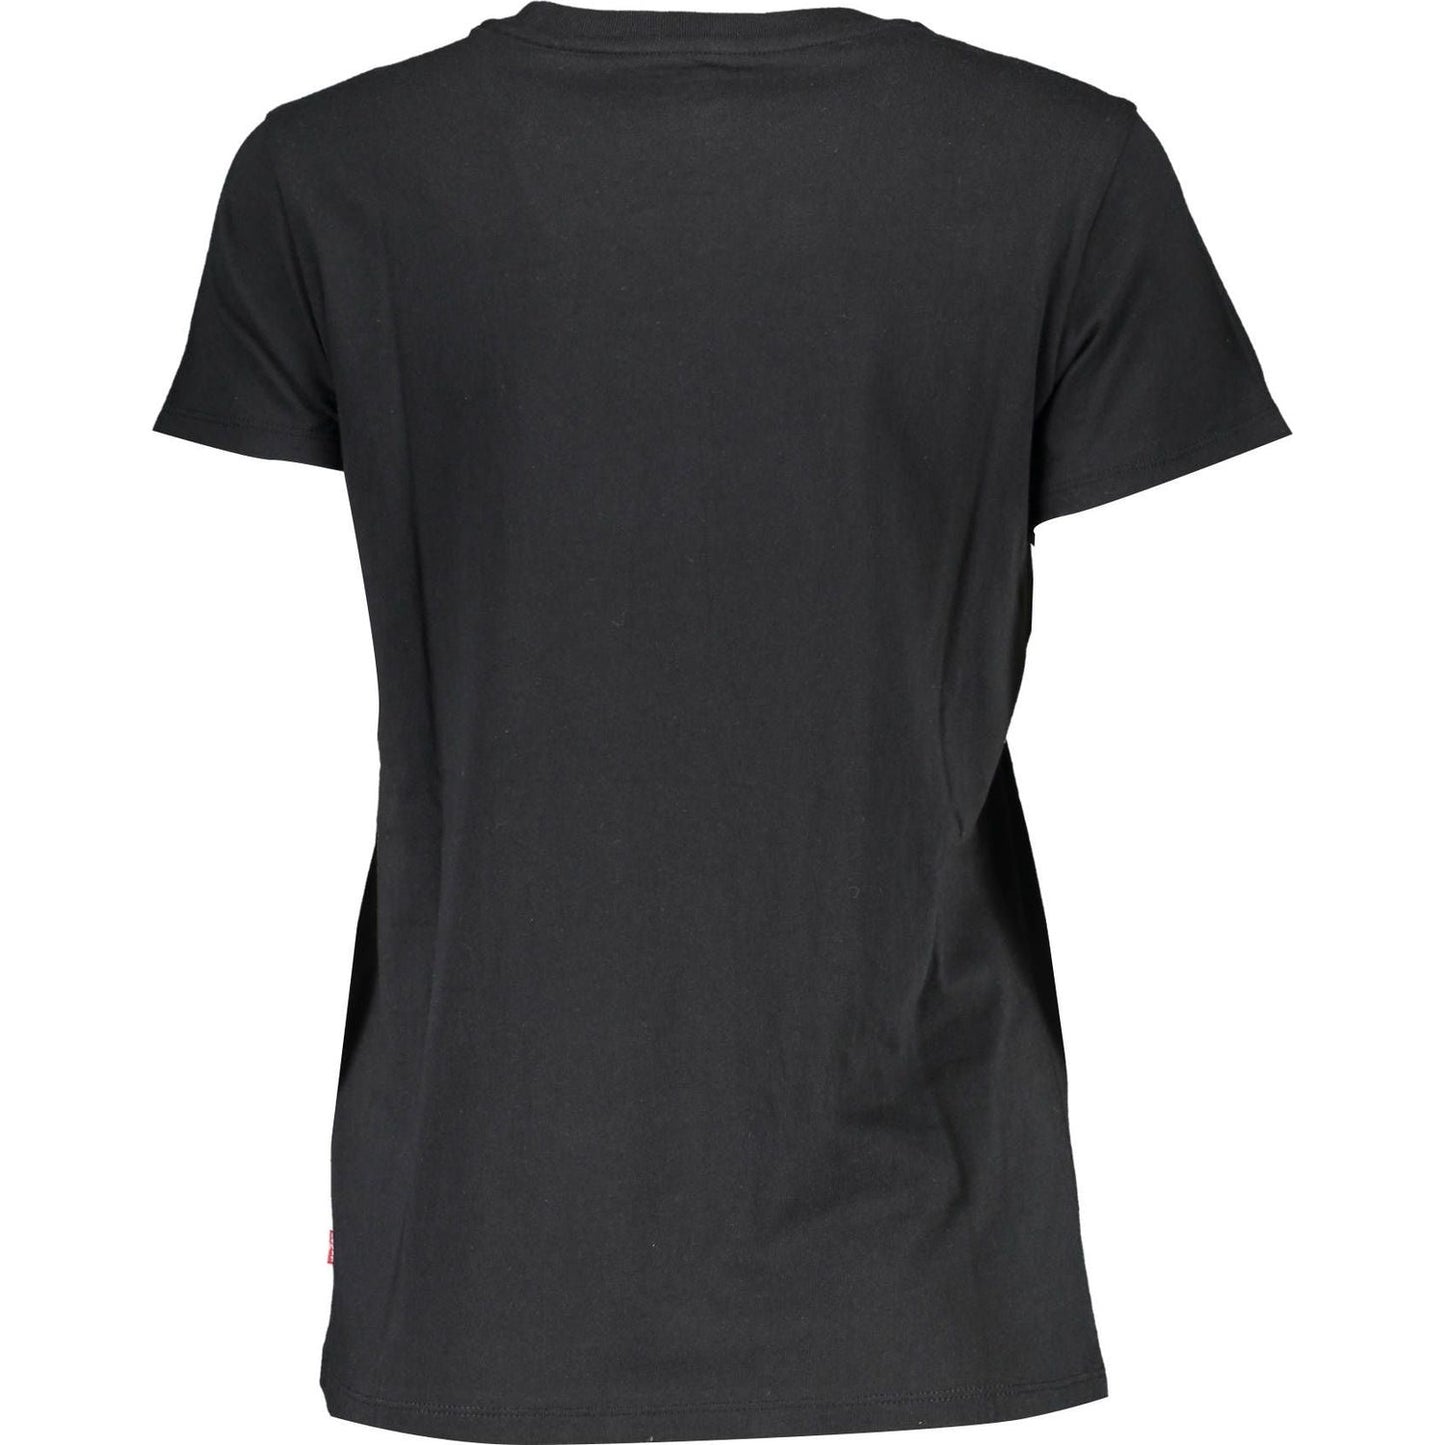 Levi's Chic Black Cotton Tee with Iconic Print chic-black-cotton-tee-with-iconic-print